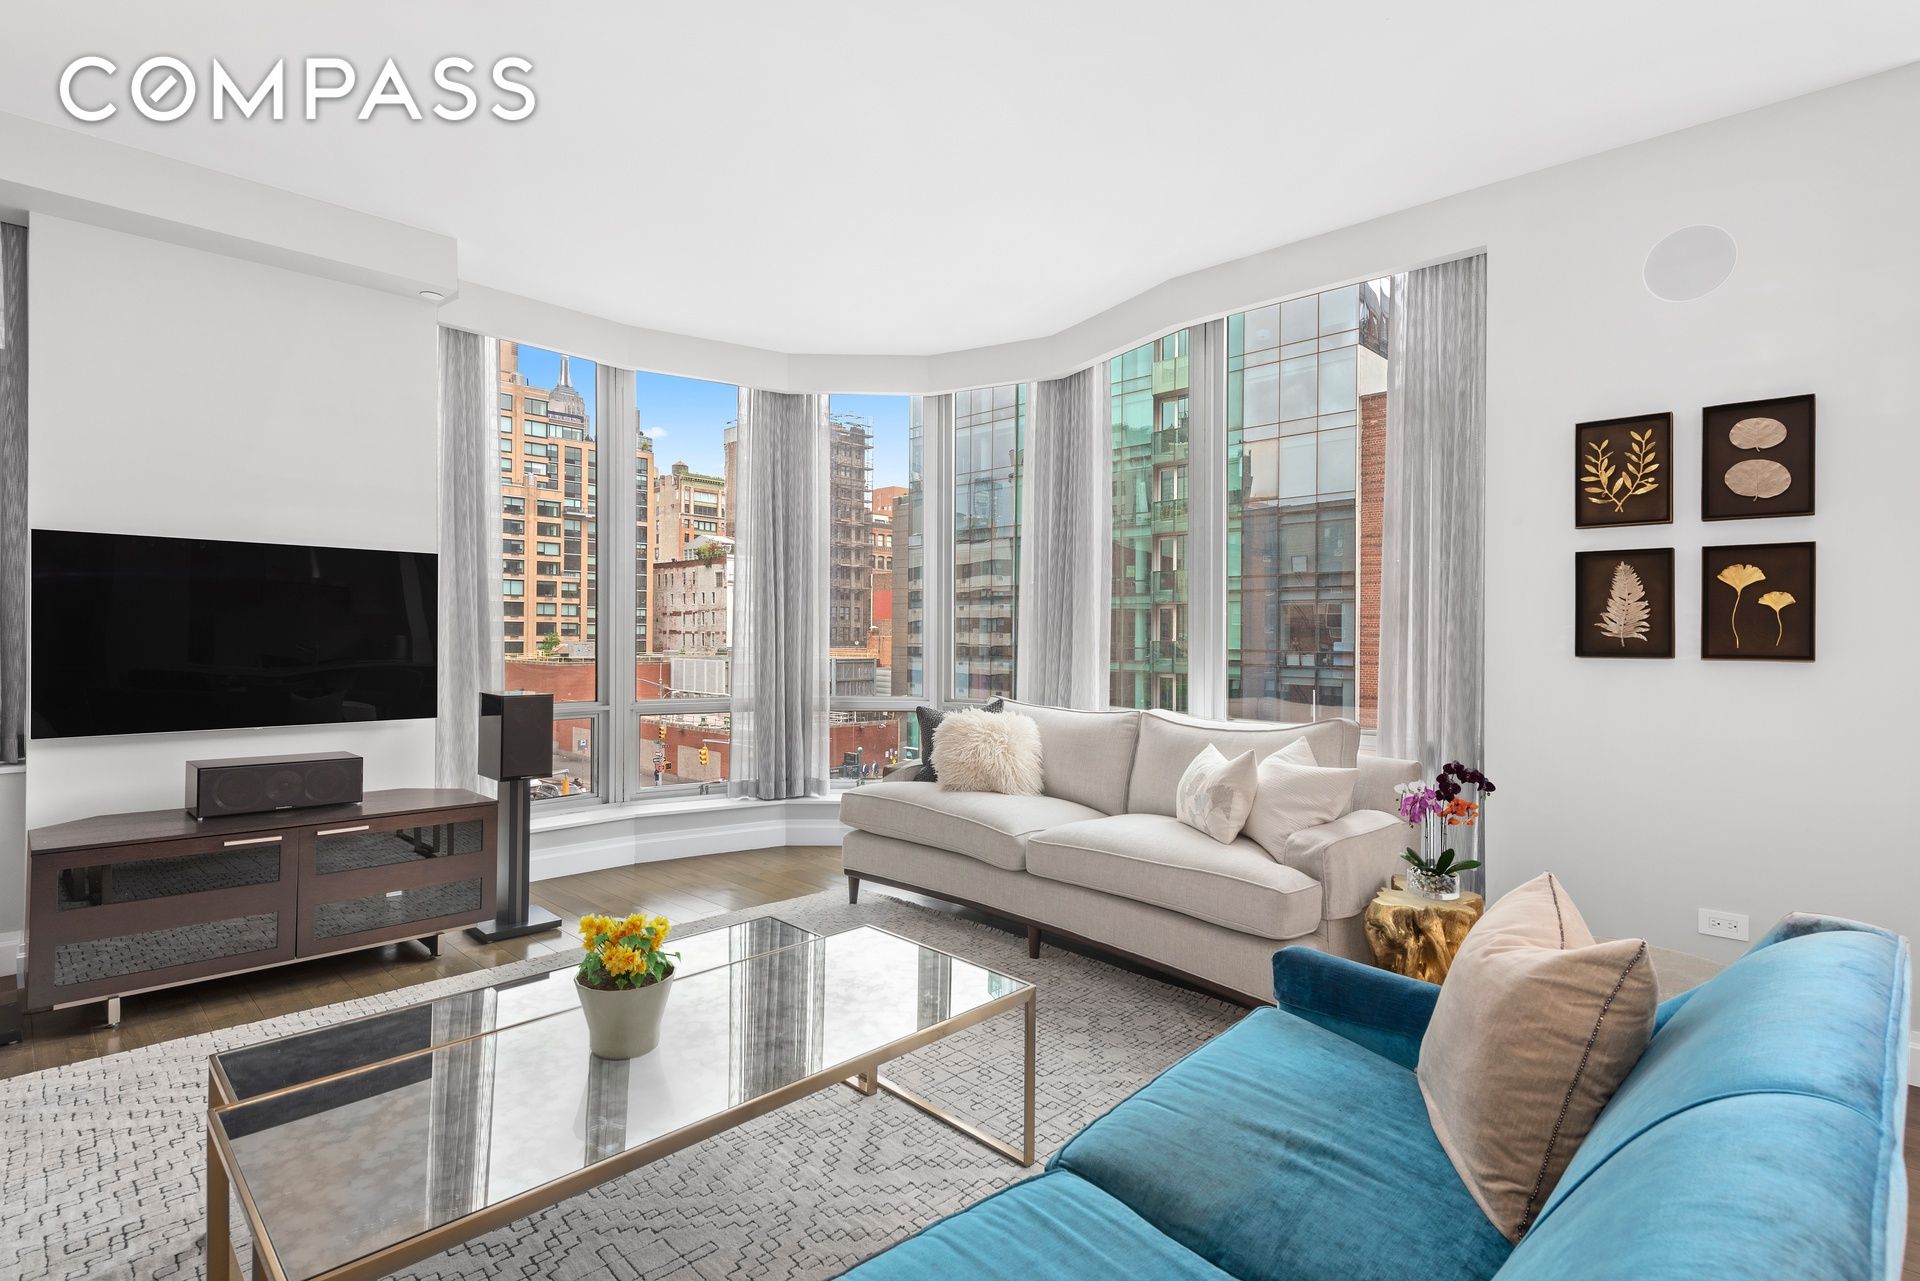 201 West 17th Street 4A, Chelsea, Downtown, NYC - 3 Bedrooms  
2.5 Bathrooms  
6 Rooms - 